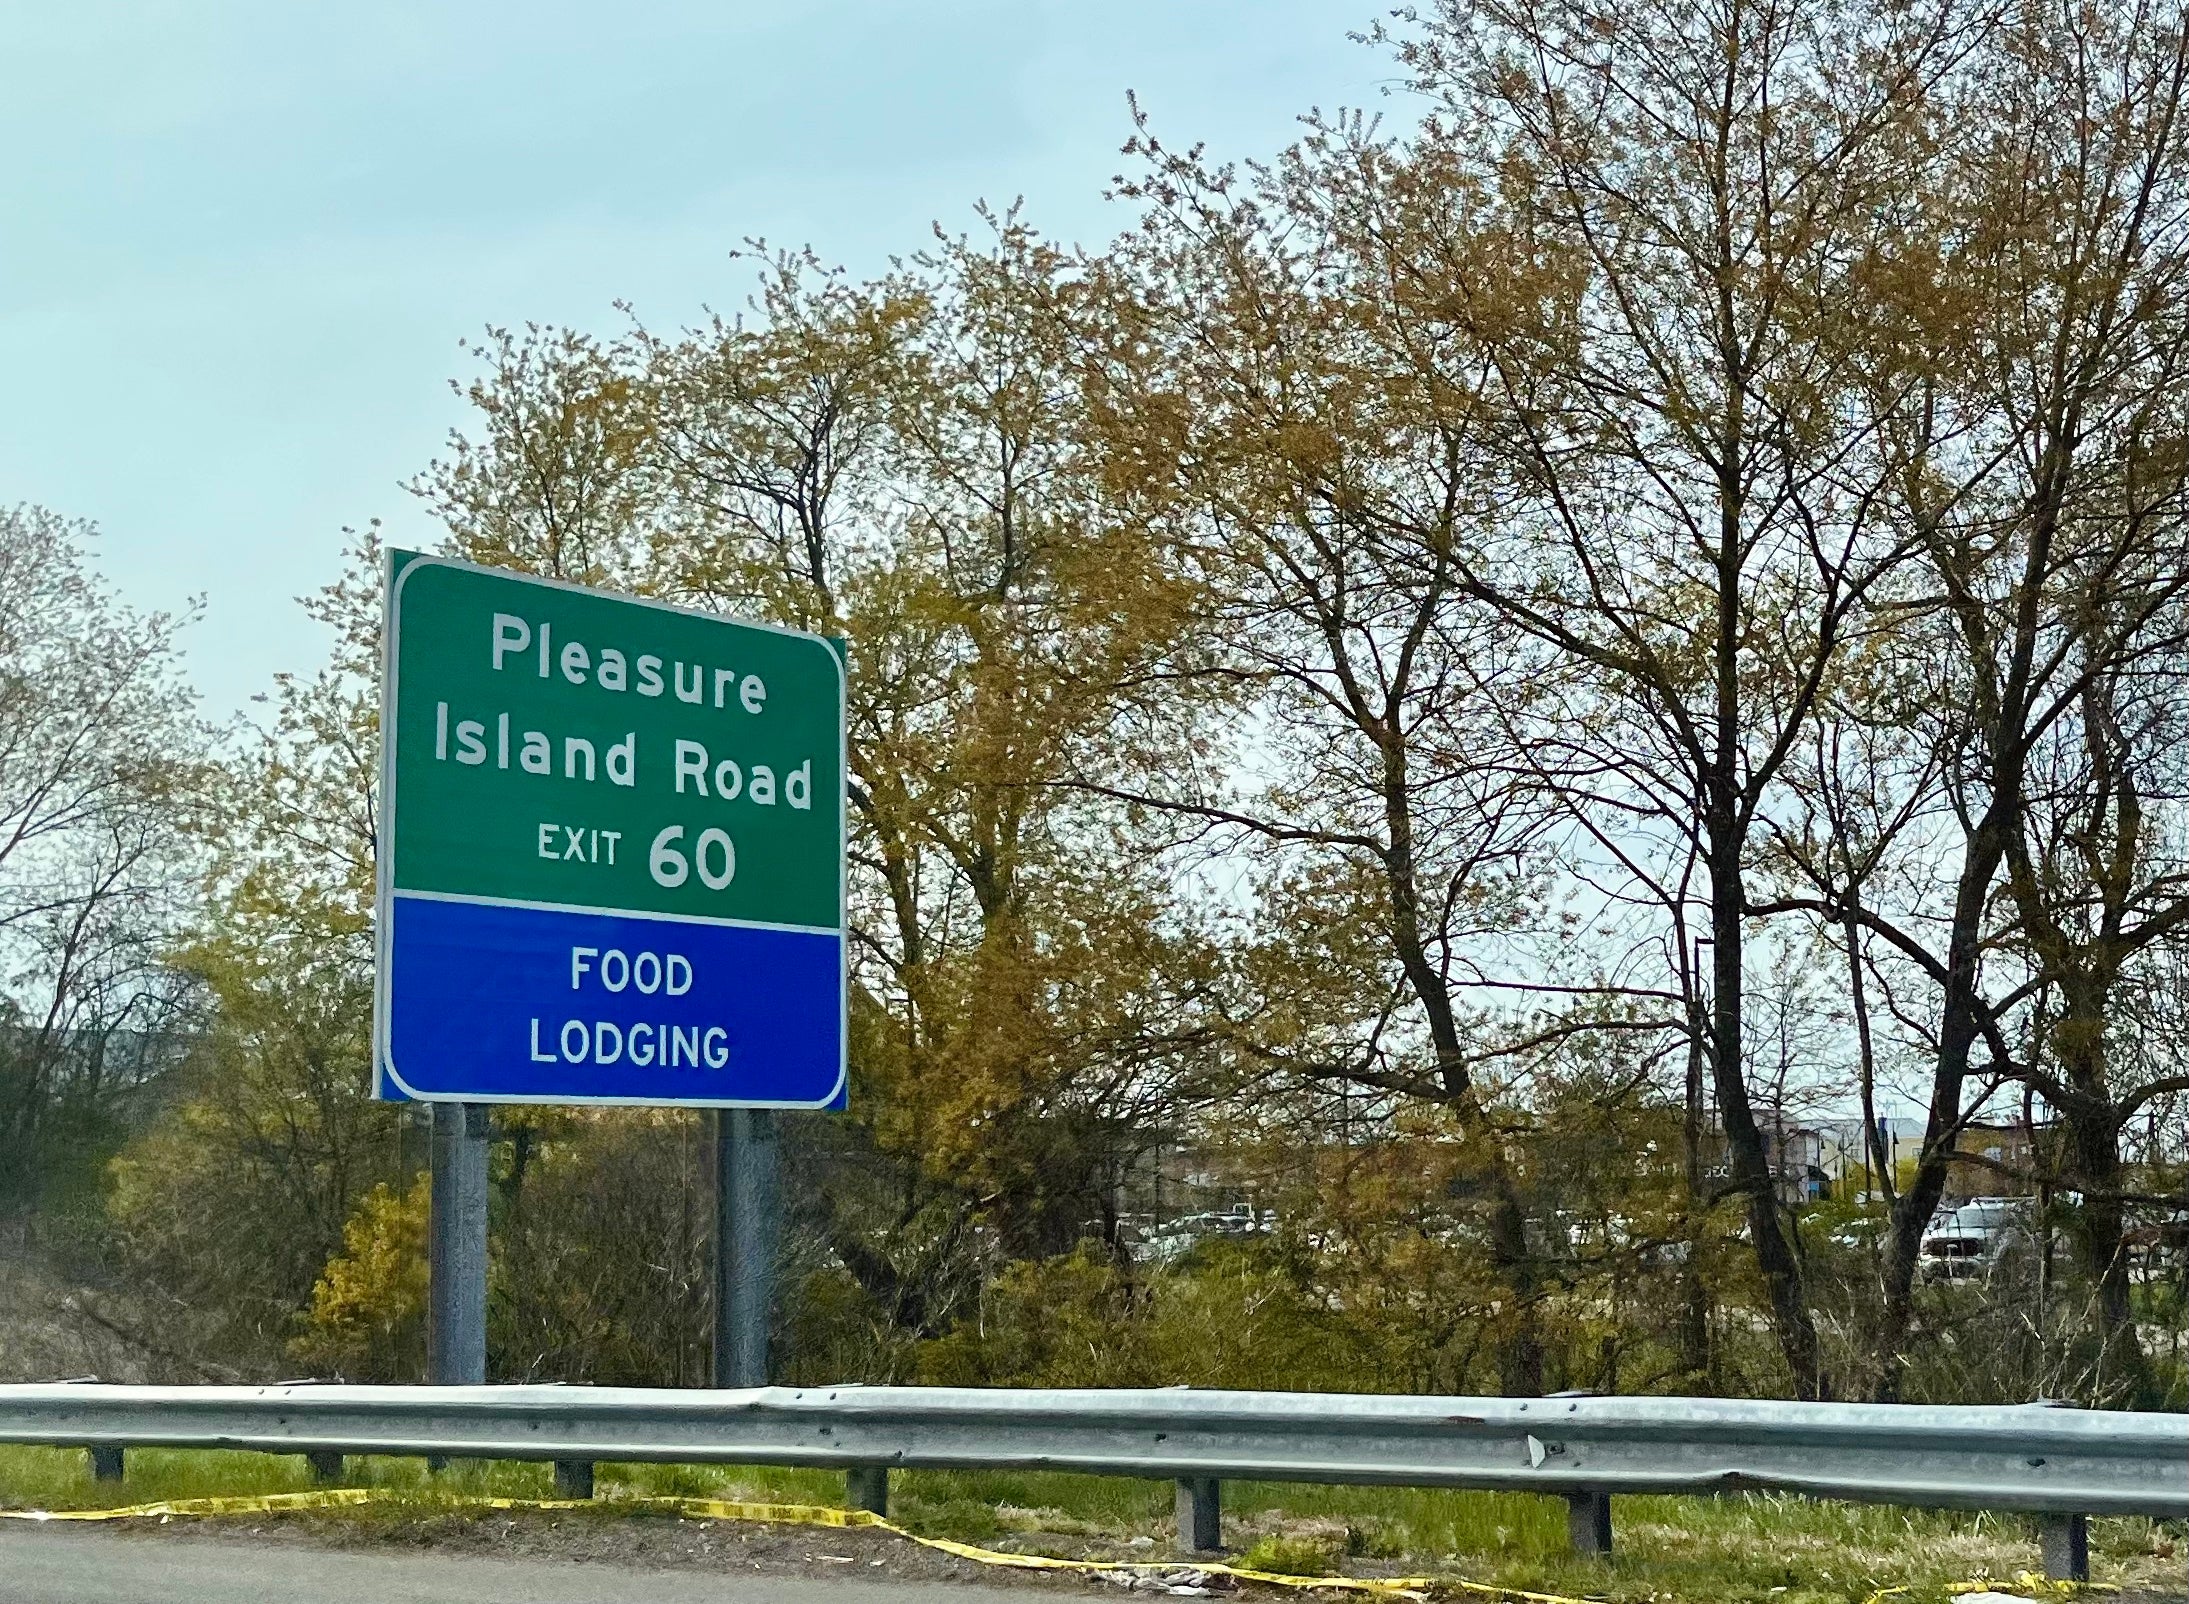 A green highway sign is pictured on the side of the road. It reads "Pleasure Island Road, Exit 60."